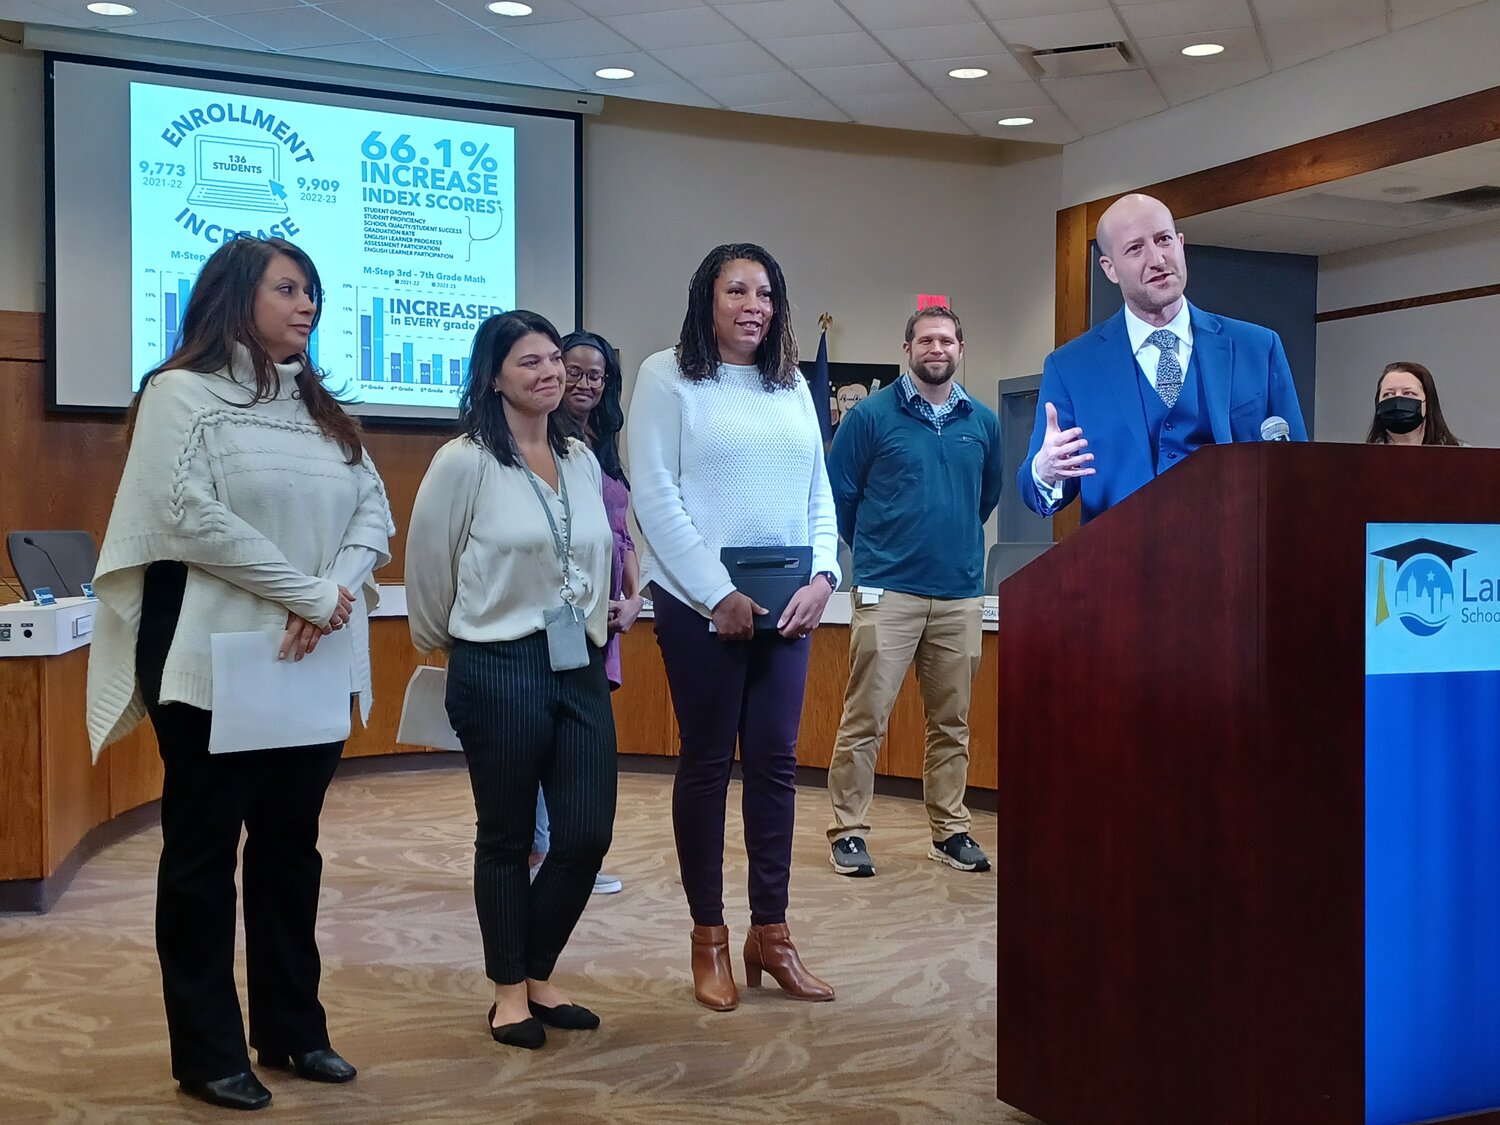 Lansing Schools Superintendent Ben Shuldiner (at lectern) highlights the work done by the three woman to his right: (from left) Anna DiPonio, the district’s director of assessment and evaluation; Heather Guerra, director of instruction for literacy and social studies; and Yvonne Thomas, director of instruction for math and science.